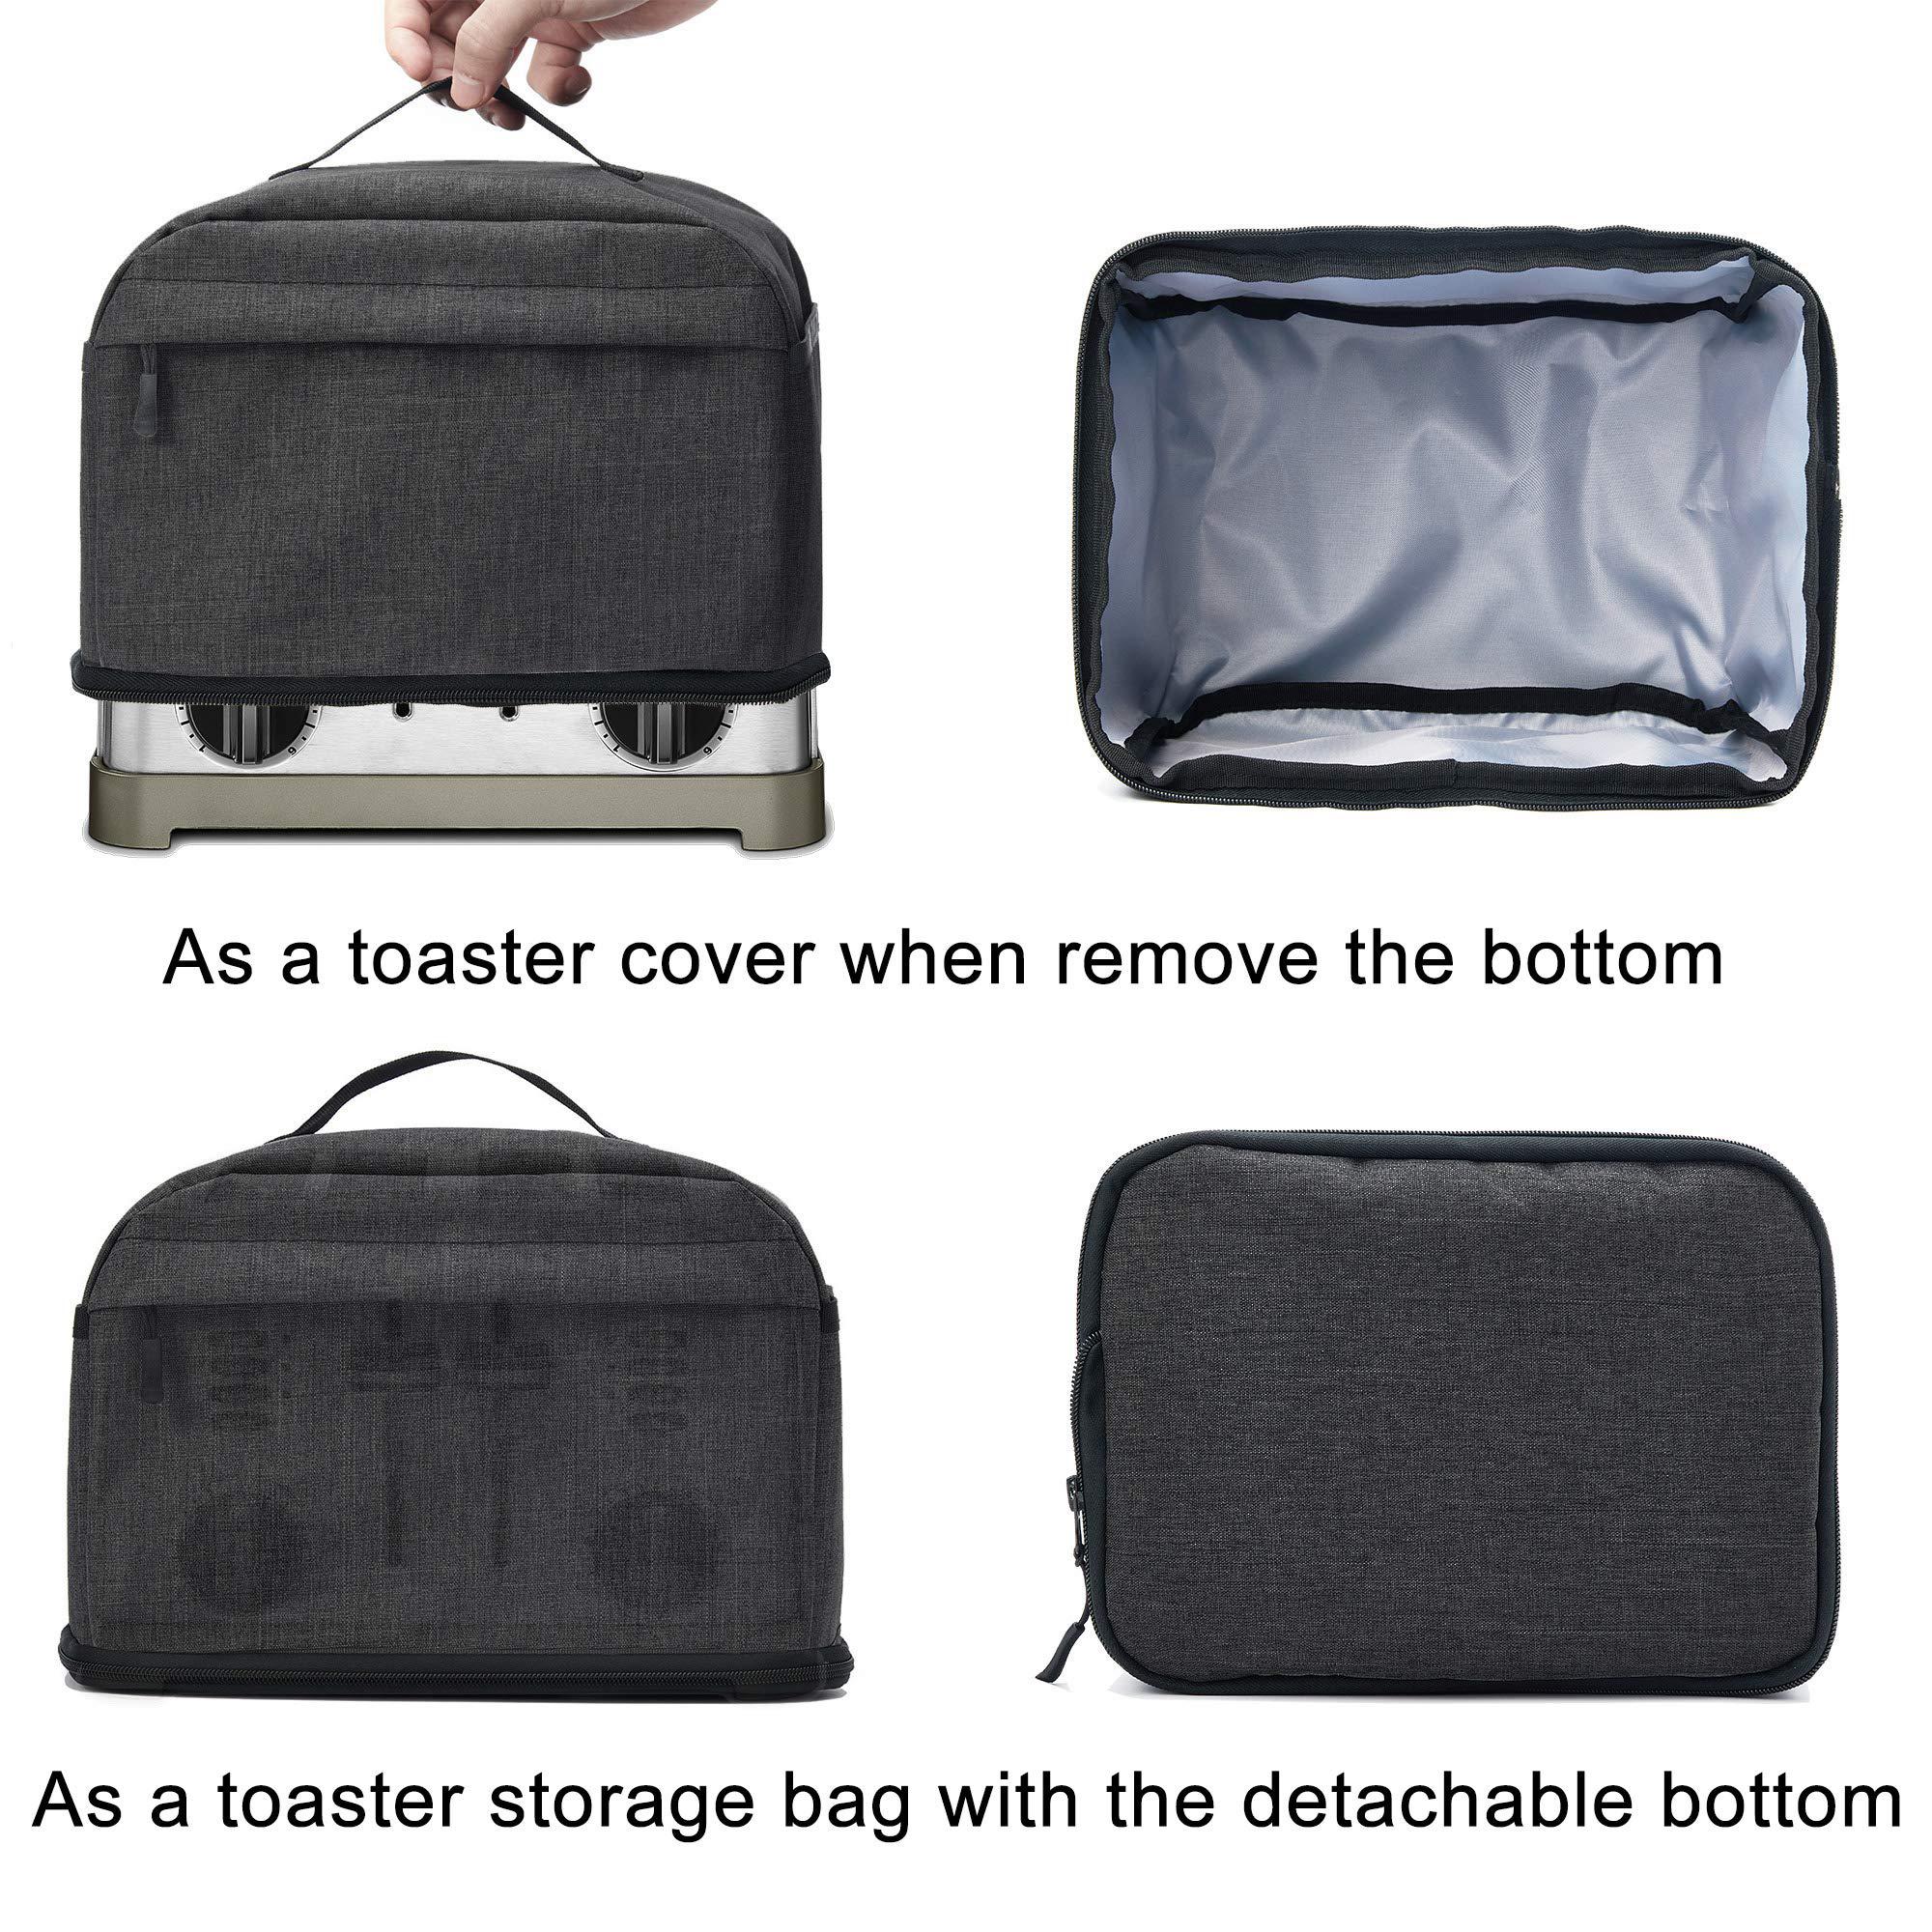 BGD vosdans 4 slice toaster cover with removable bottom 2-in-1 toaster bag with pockets toaster storage bag with handle, dust and